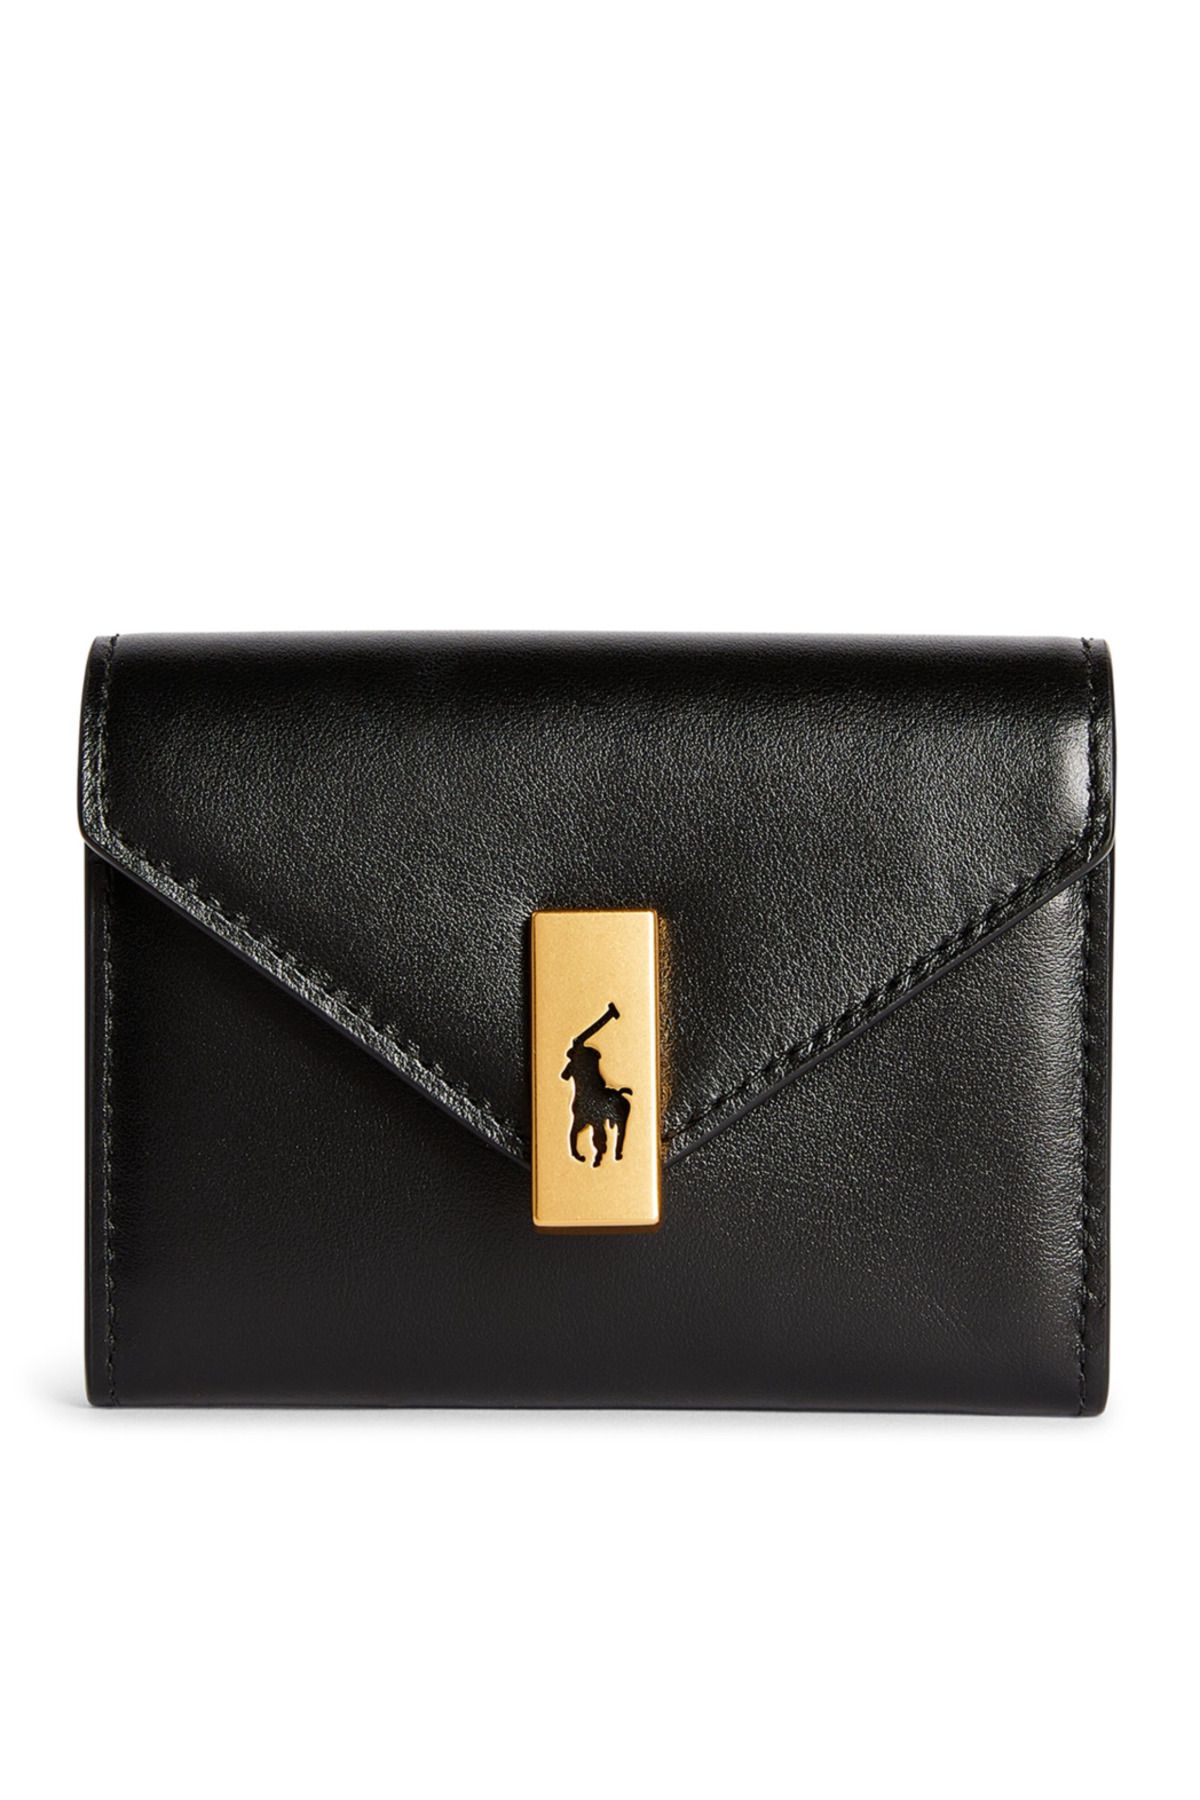 Ralph Lauren Small Leather Polo ID Wallet